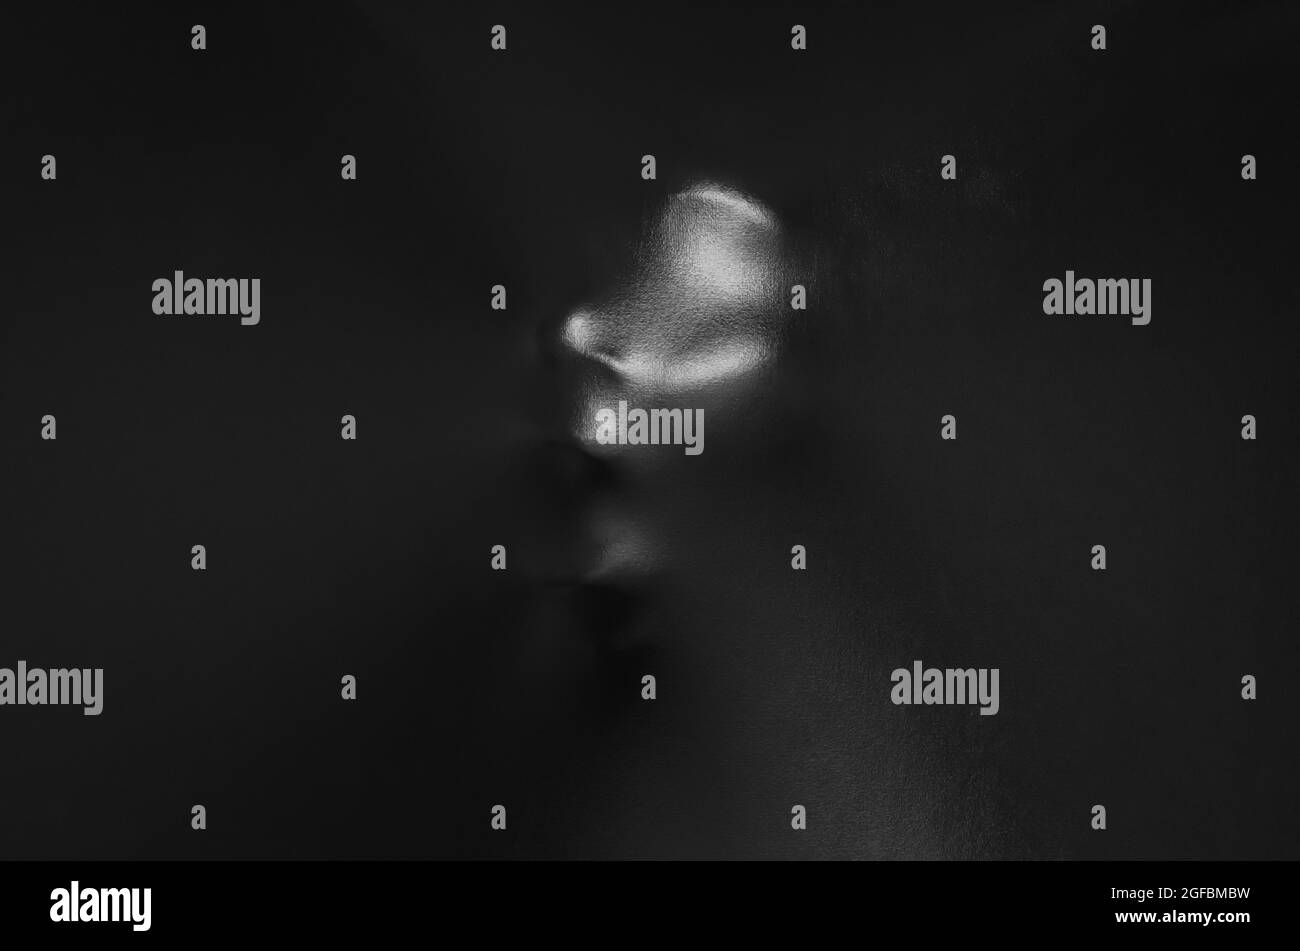 Screaming human face pressing through black fabric with shine and dark side for Halloween background concept. Stock Photo